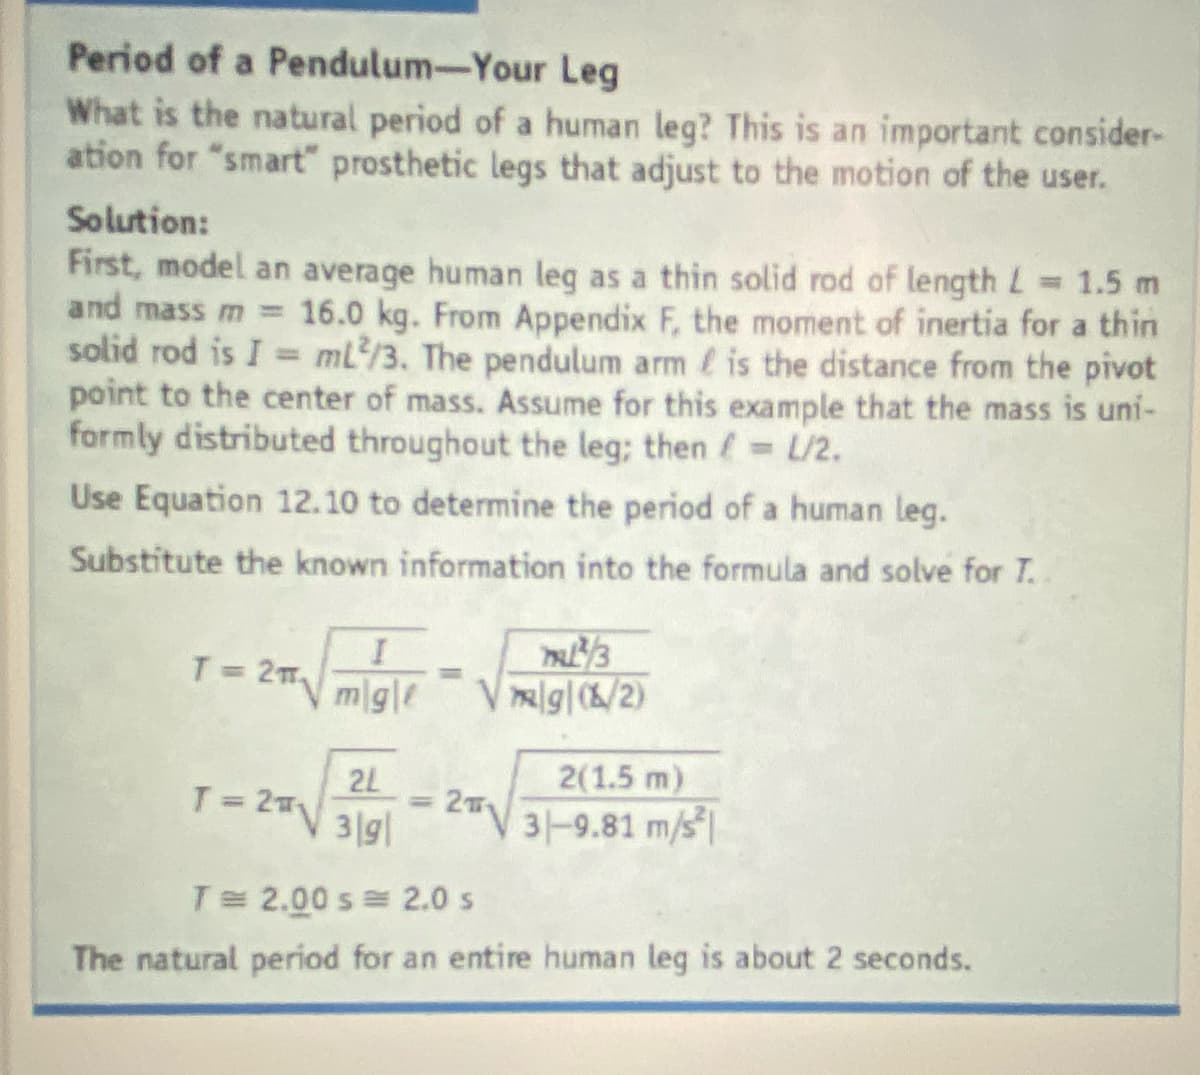 Period of a Pendulum-Your Leg
What is the natural period of a human leg? This is an important consider-
ation for "smart" prosthetic legs that adjust to the motion of the user.
Solution:
First, model an average human leg as a thin solid rod of length L
and mass m 16.0 kg. From Appendix F, the moment of inertia for a thin
solid rod is I mL/3. The pendulum arm is the distance from the pivot
point to the center of mass. Assume for this example that the mass is uni-
formly distributed throughout the leg; then L/2.
= 1.5 m
Use Equation 12.10 to determine the period of a human leg.
Substitute the known information into the formula and solve for T..
T= 2m
mgle
V lg|/2)
= 2T
T-2V3191
2L
3|g|
2(1.5 m)
31-9.81 m/s
T 2.00 s= 2.0 s
The natural period for an entire human leg is about 2 seconds.
